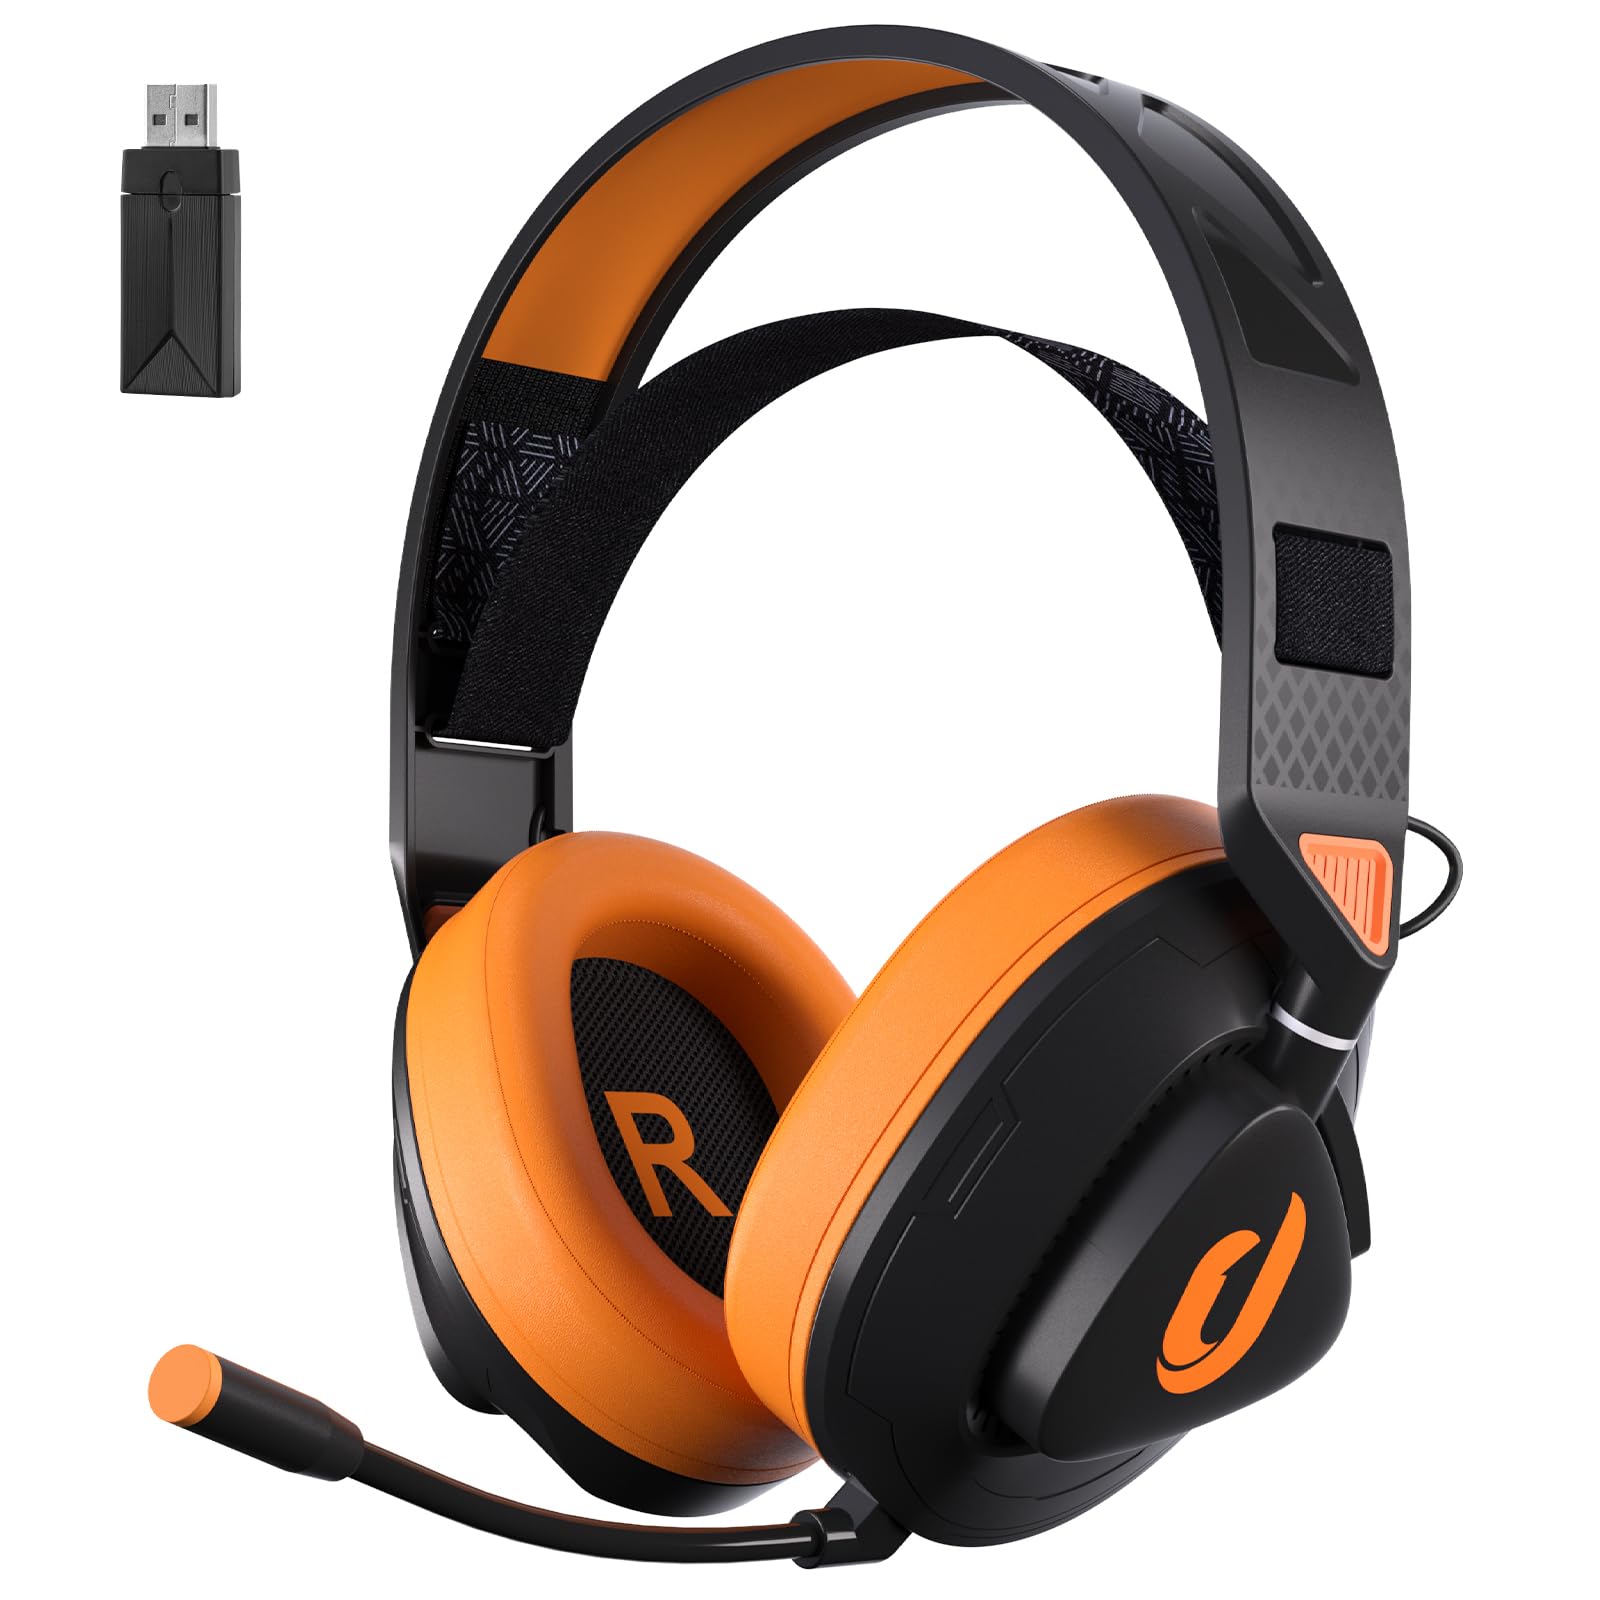 Jeecoo G90 Wireless Gaming Headset - Lightweight Comfort with Suspension Headband, Superb Sound Detachable Mic, Low-Latency Bluetooth 2.4G Wireless Gaming Headphones - PS4 PS5 PC Laptops Compatible